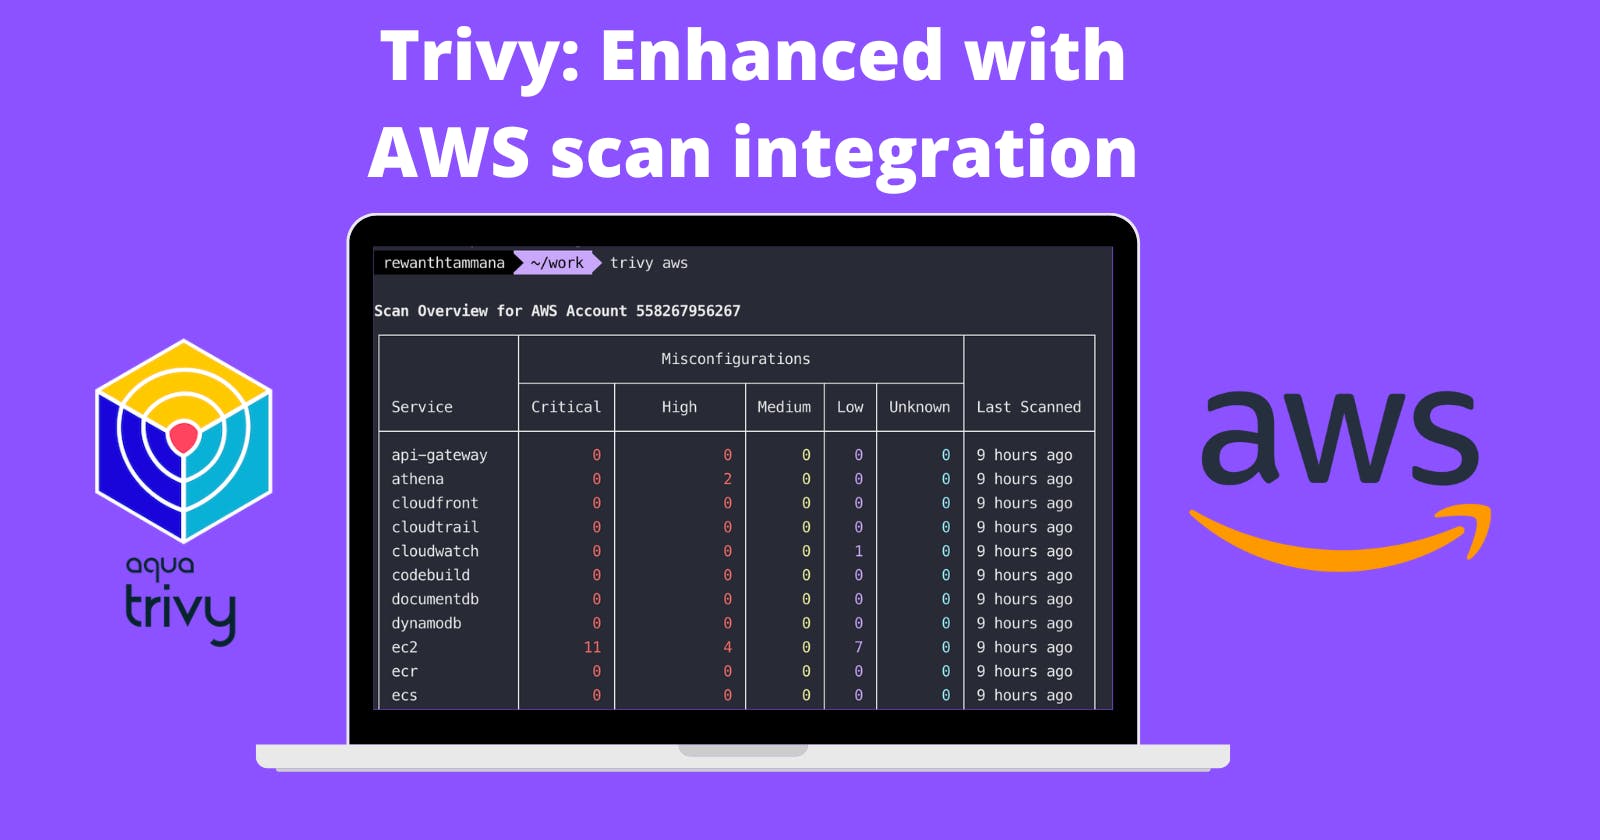 Trivy: Enhanced with AWS scan integration